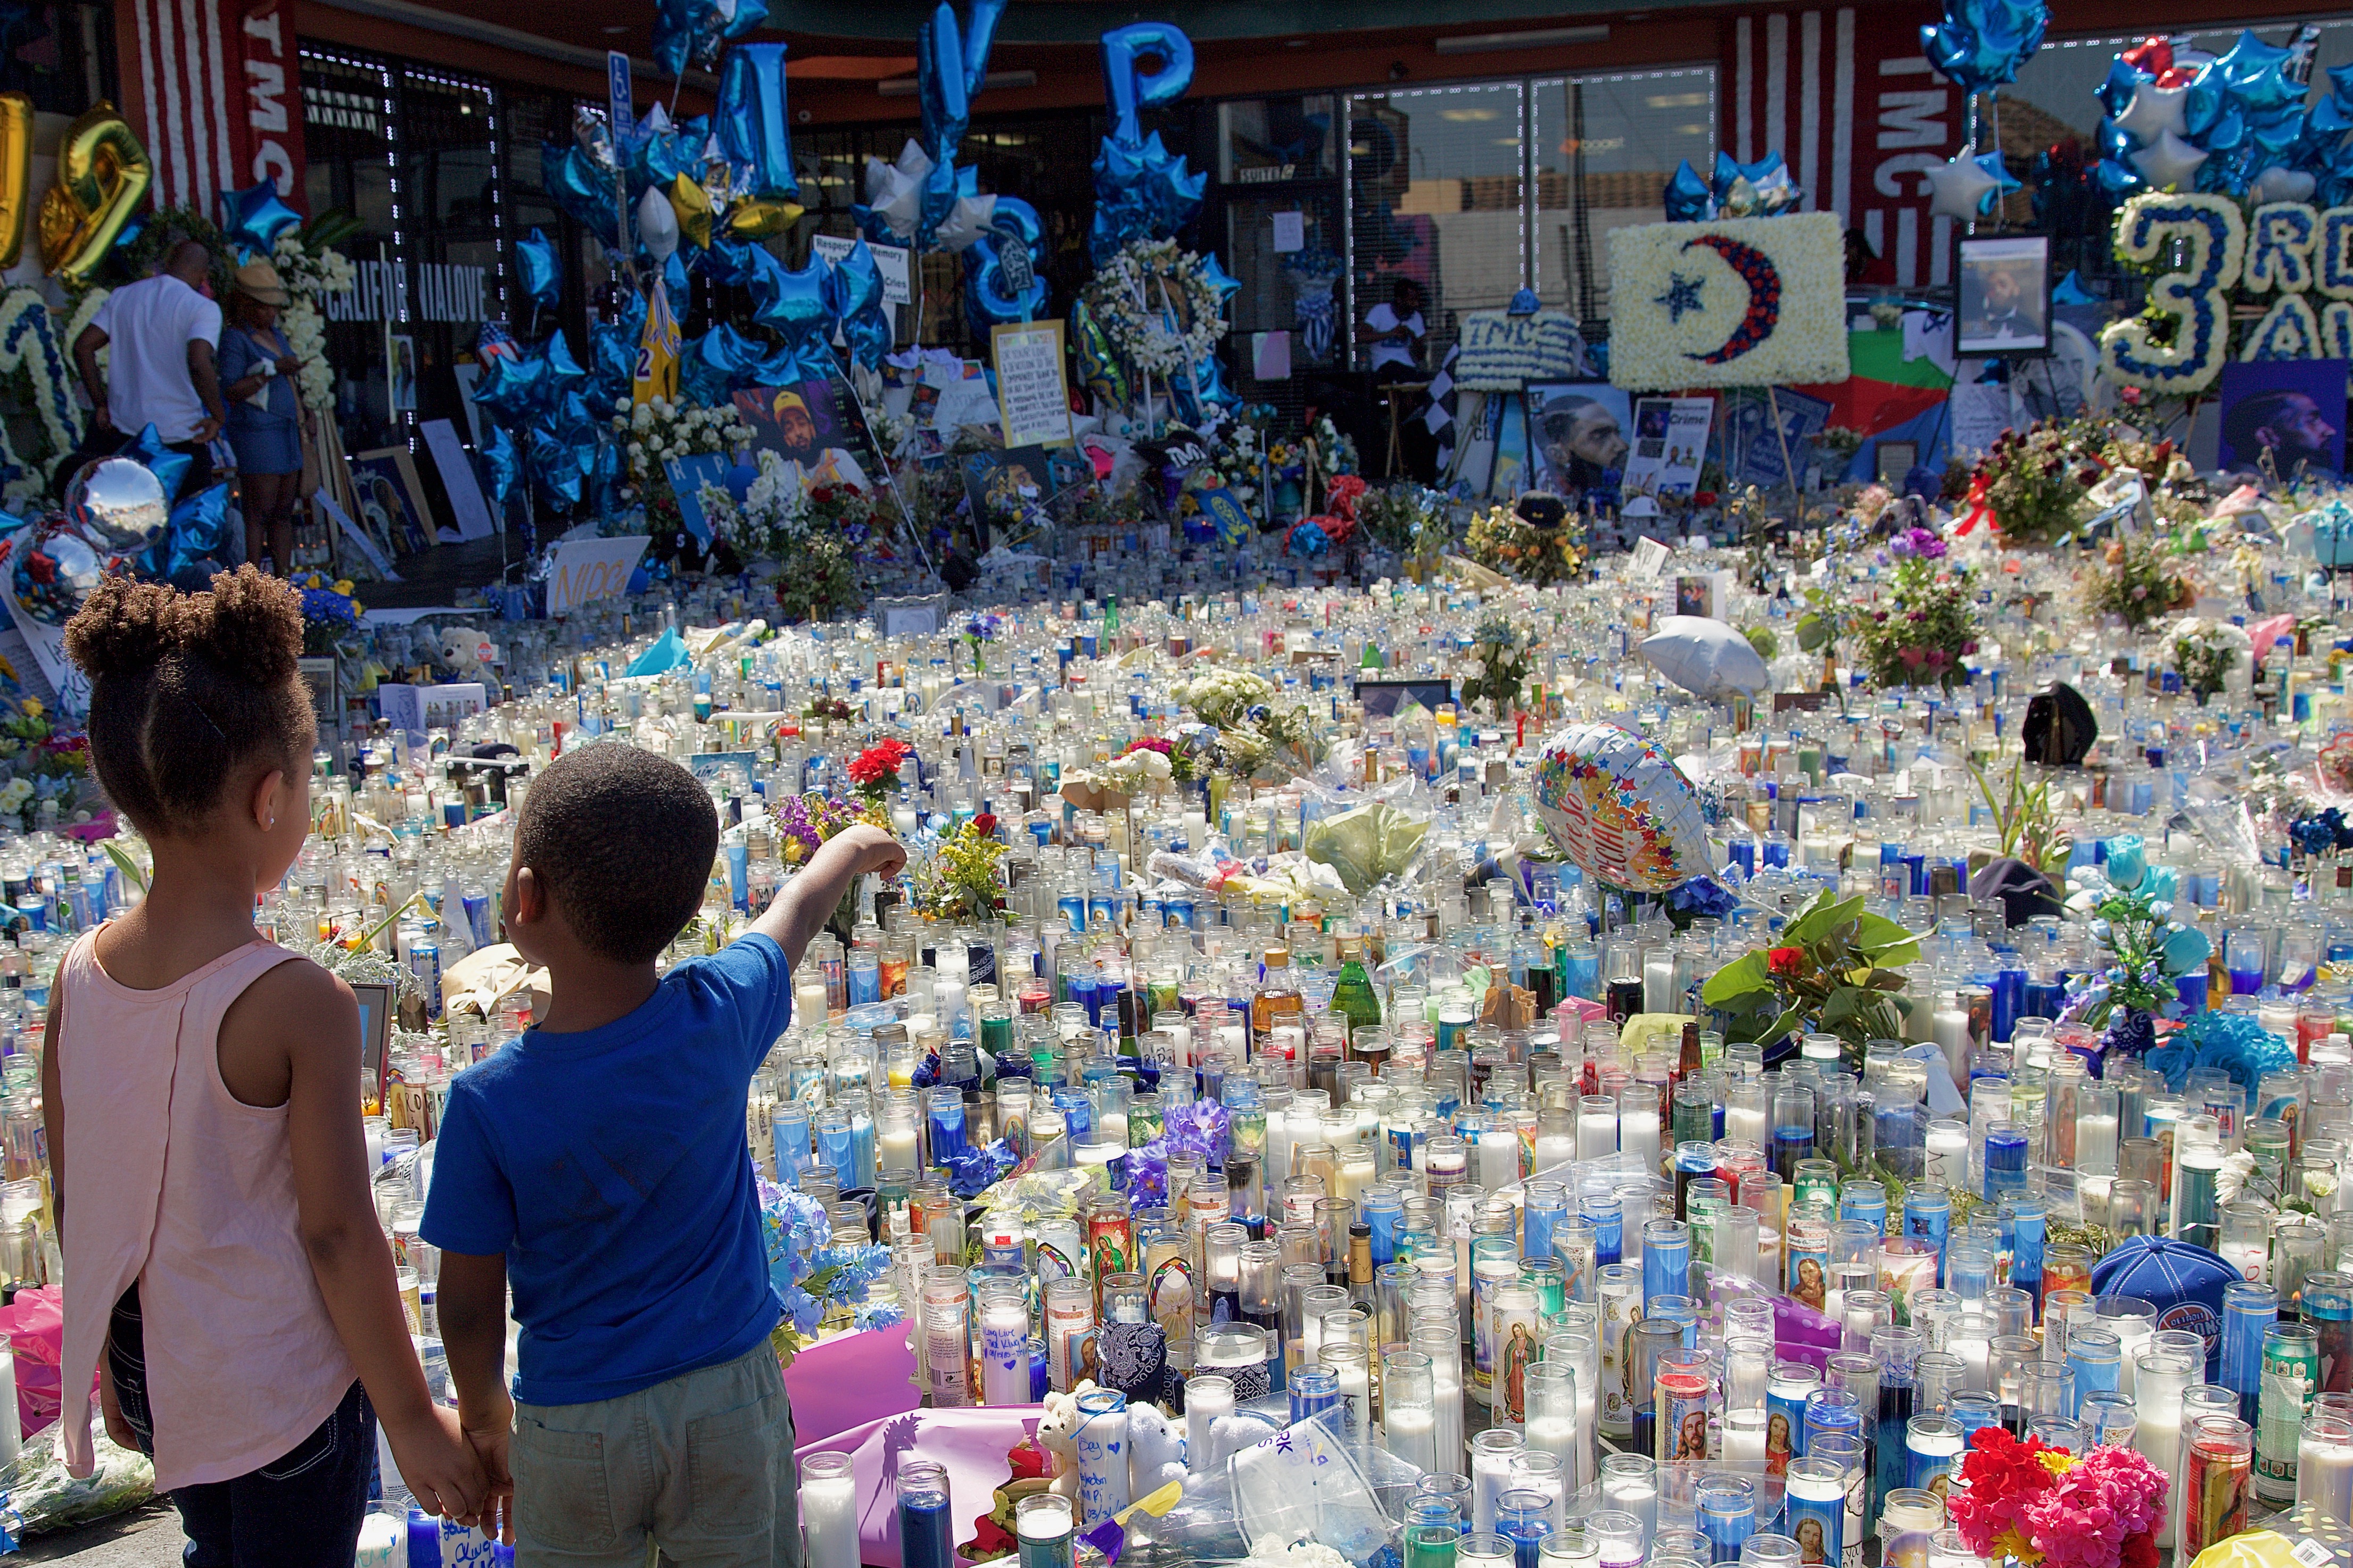 The memorial to Nipsey Hussle sits in front of The Marathon store in the strip mall where he spent much of his life and where he worked to uplift the community. He died here March 31. Sahra Sulaiman/Streetsblog L.A.